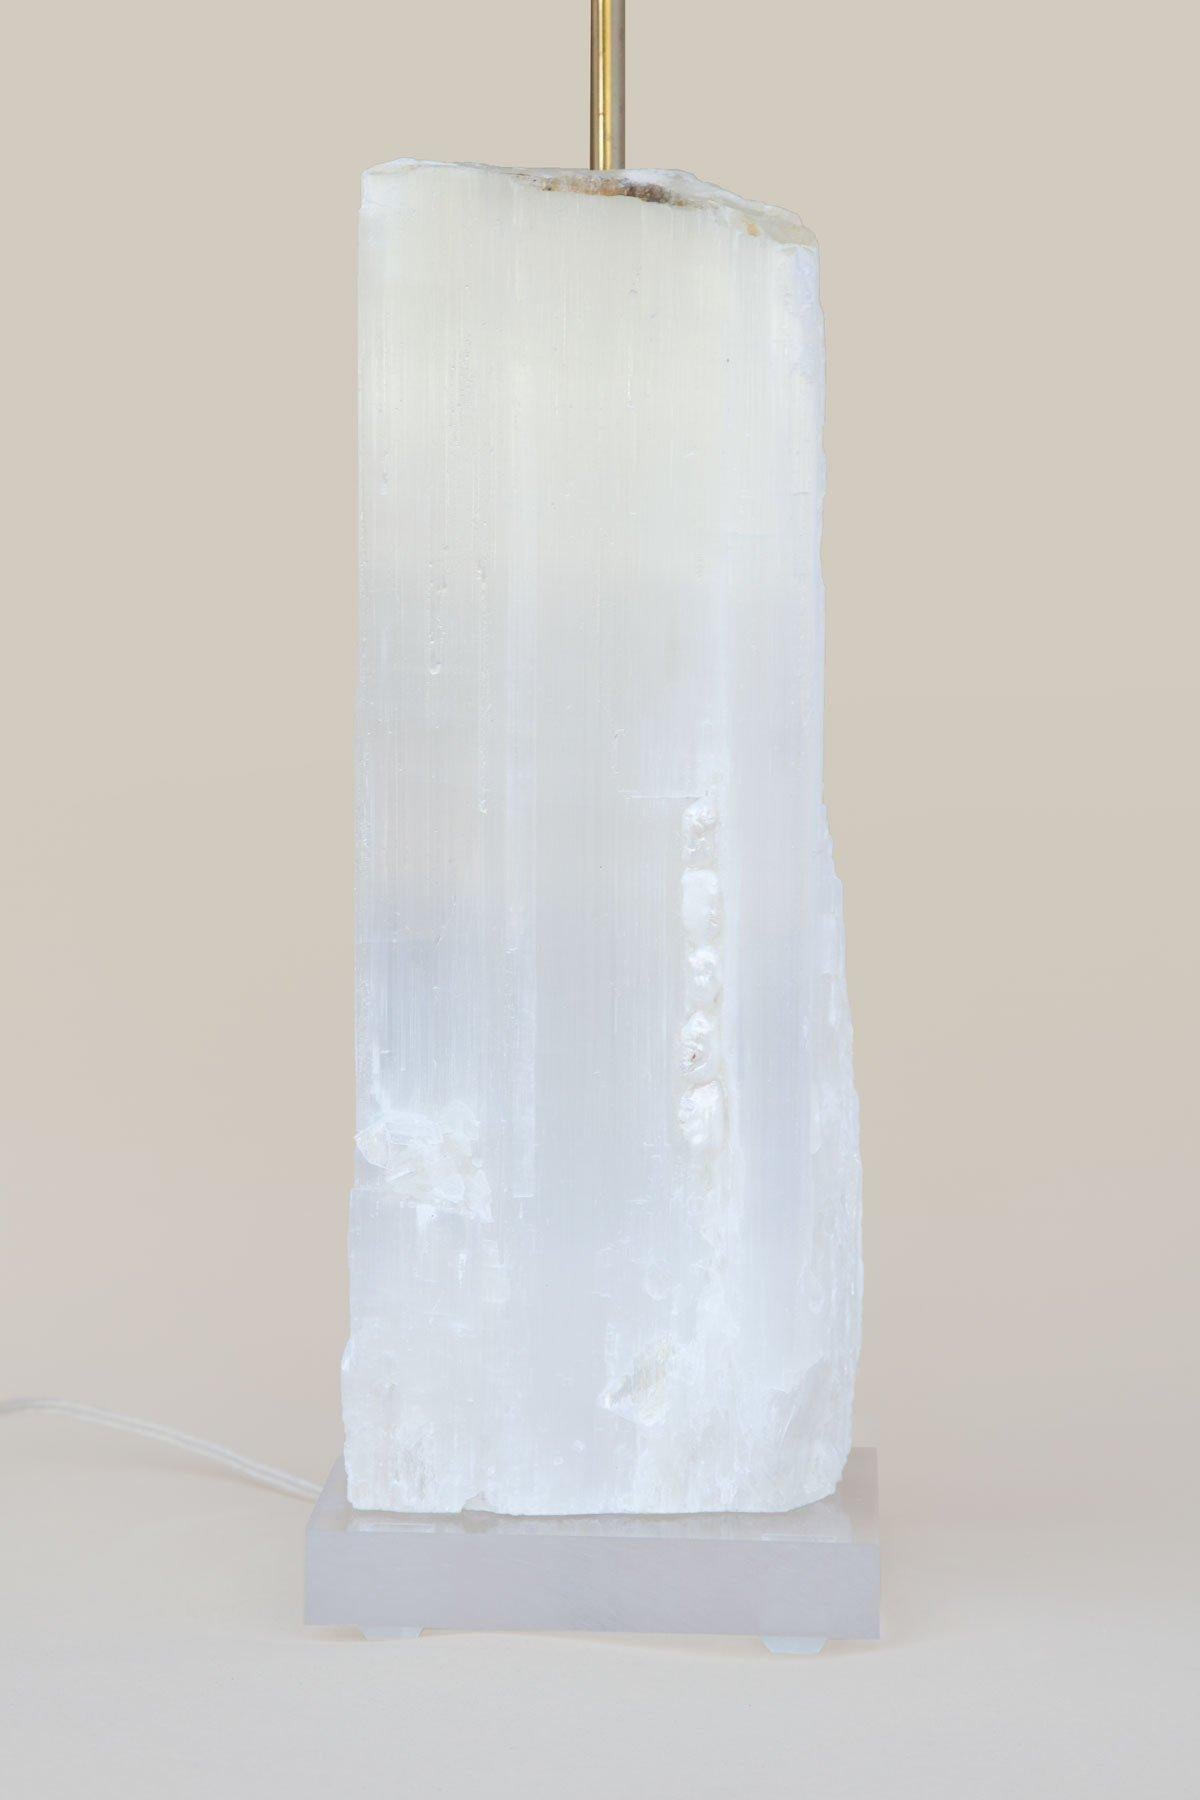 A ruler selenite lamp with baroque pearls on lucite. 

Ruler selenite is made up of single prismatic crystals from Morocco that were formed in extensive beds by the evaporation of ocean brine. This mineral is characterized by a silky, pearly